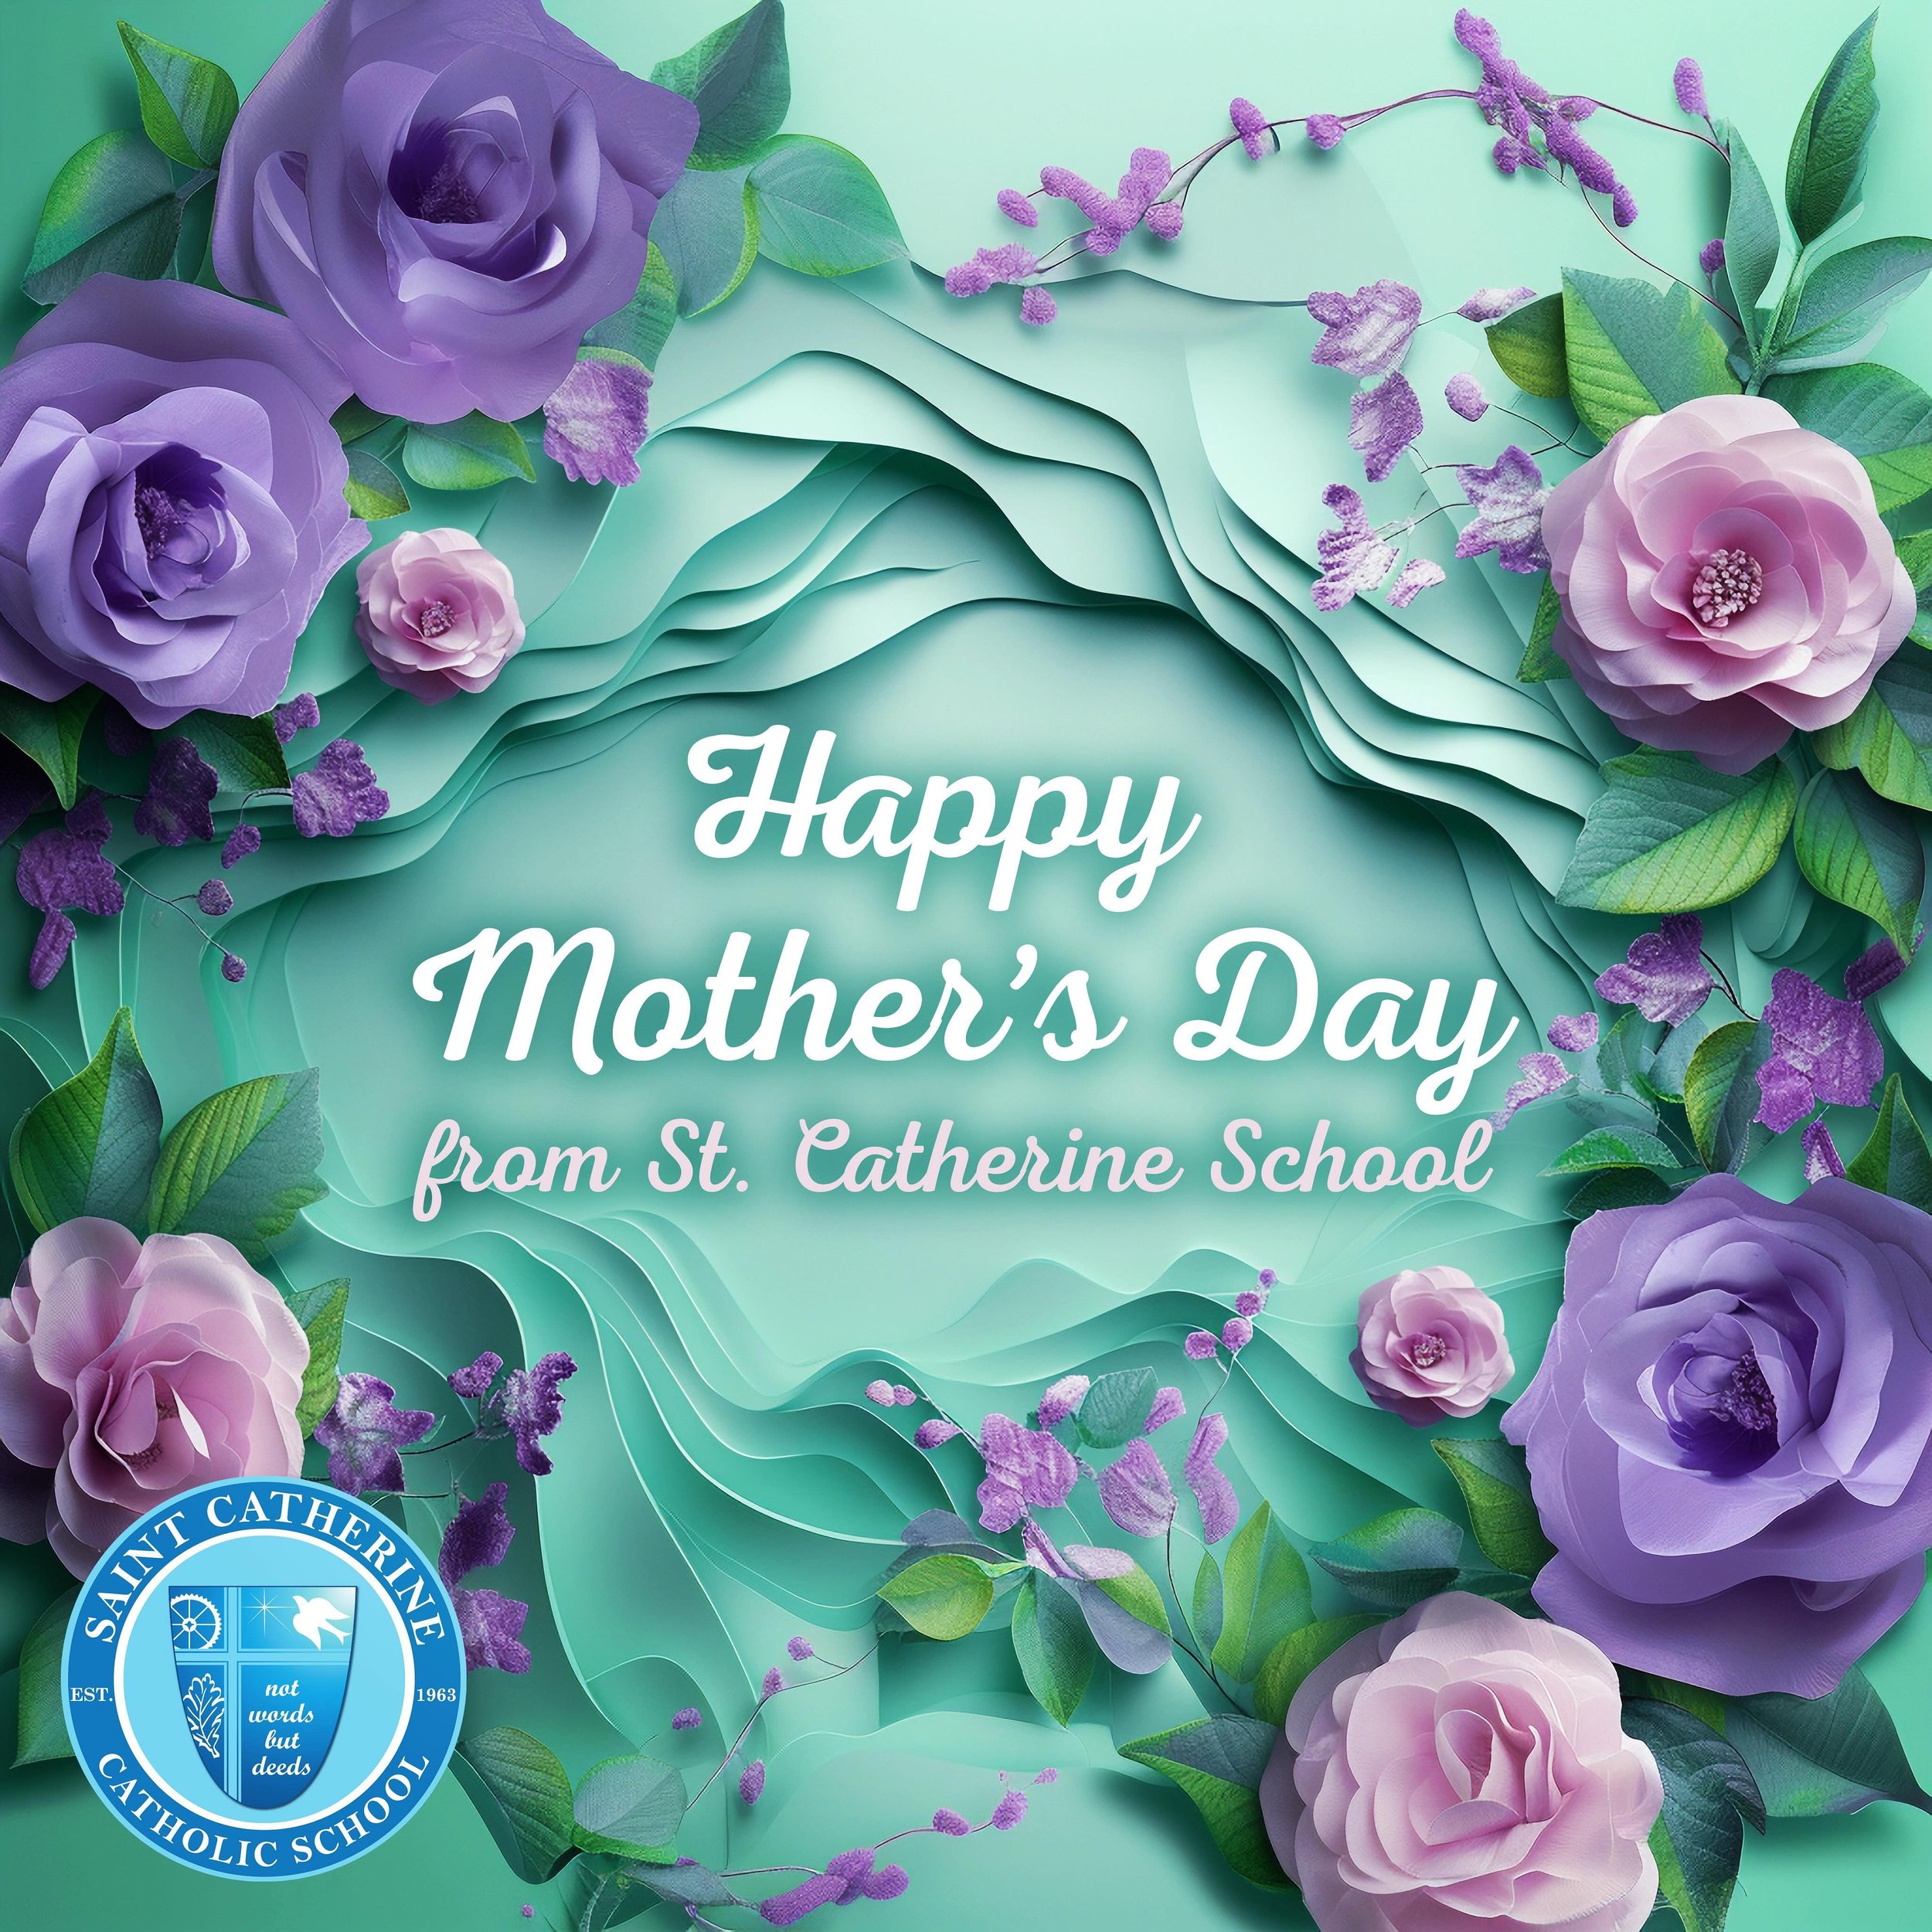 Happy Mother's Day to all of our incredible moms! 💐 Today, we celebrate the love, strength, and devotion that you give. Moms, stepmoms, grandmas, aunts and the many mother figures ~ your impact is immeasurable and we are so very grateful for YOU!